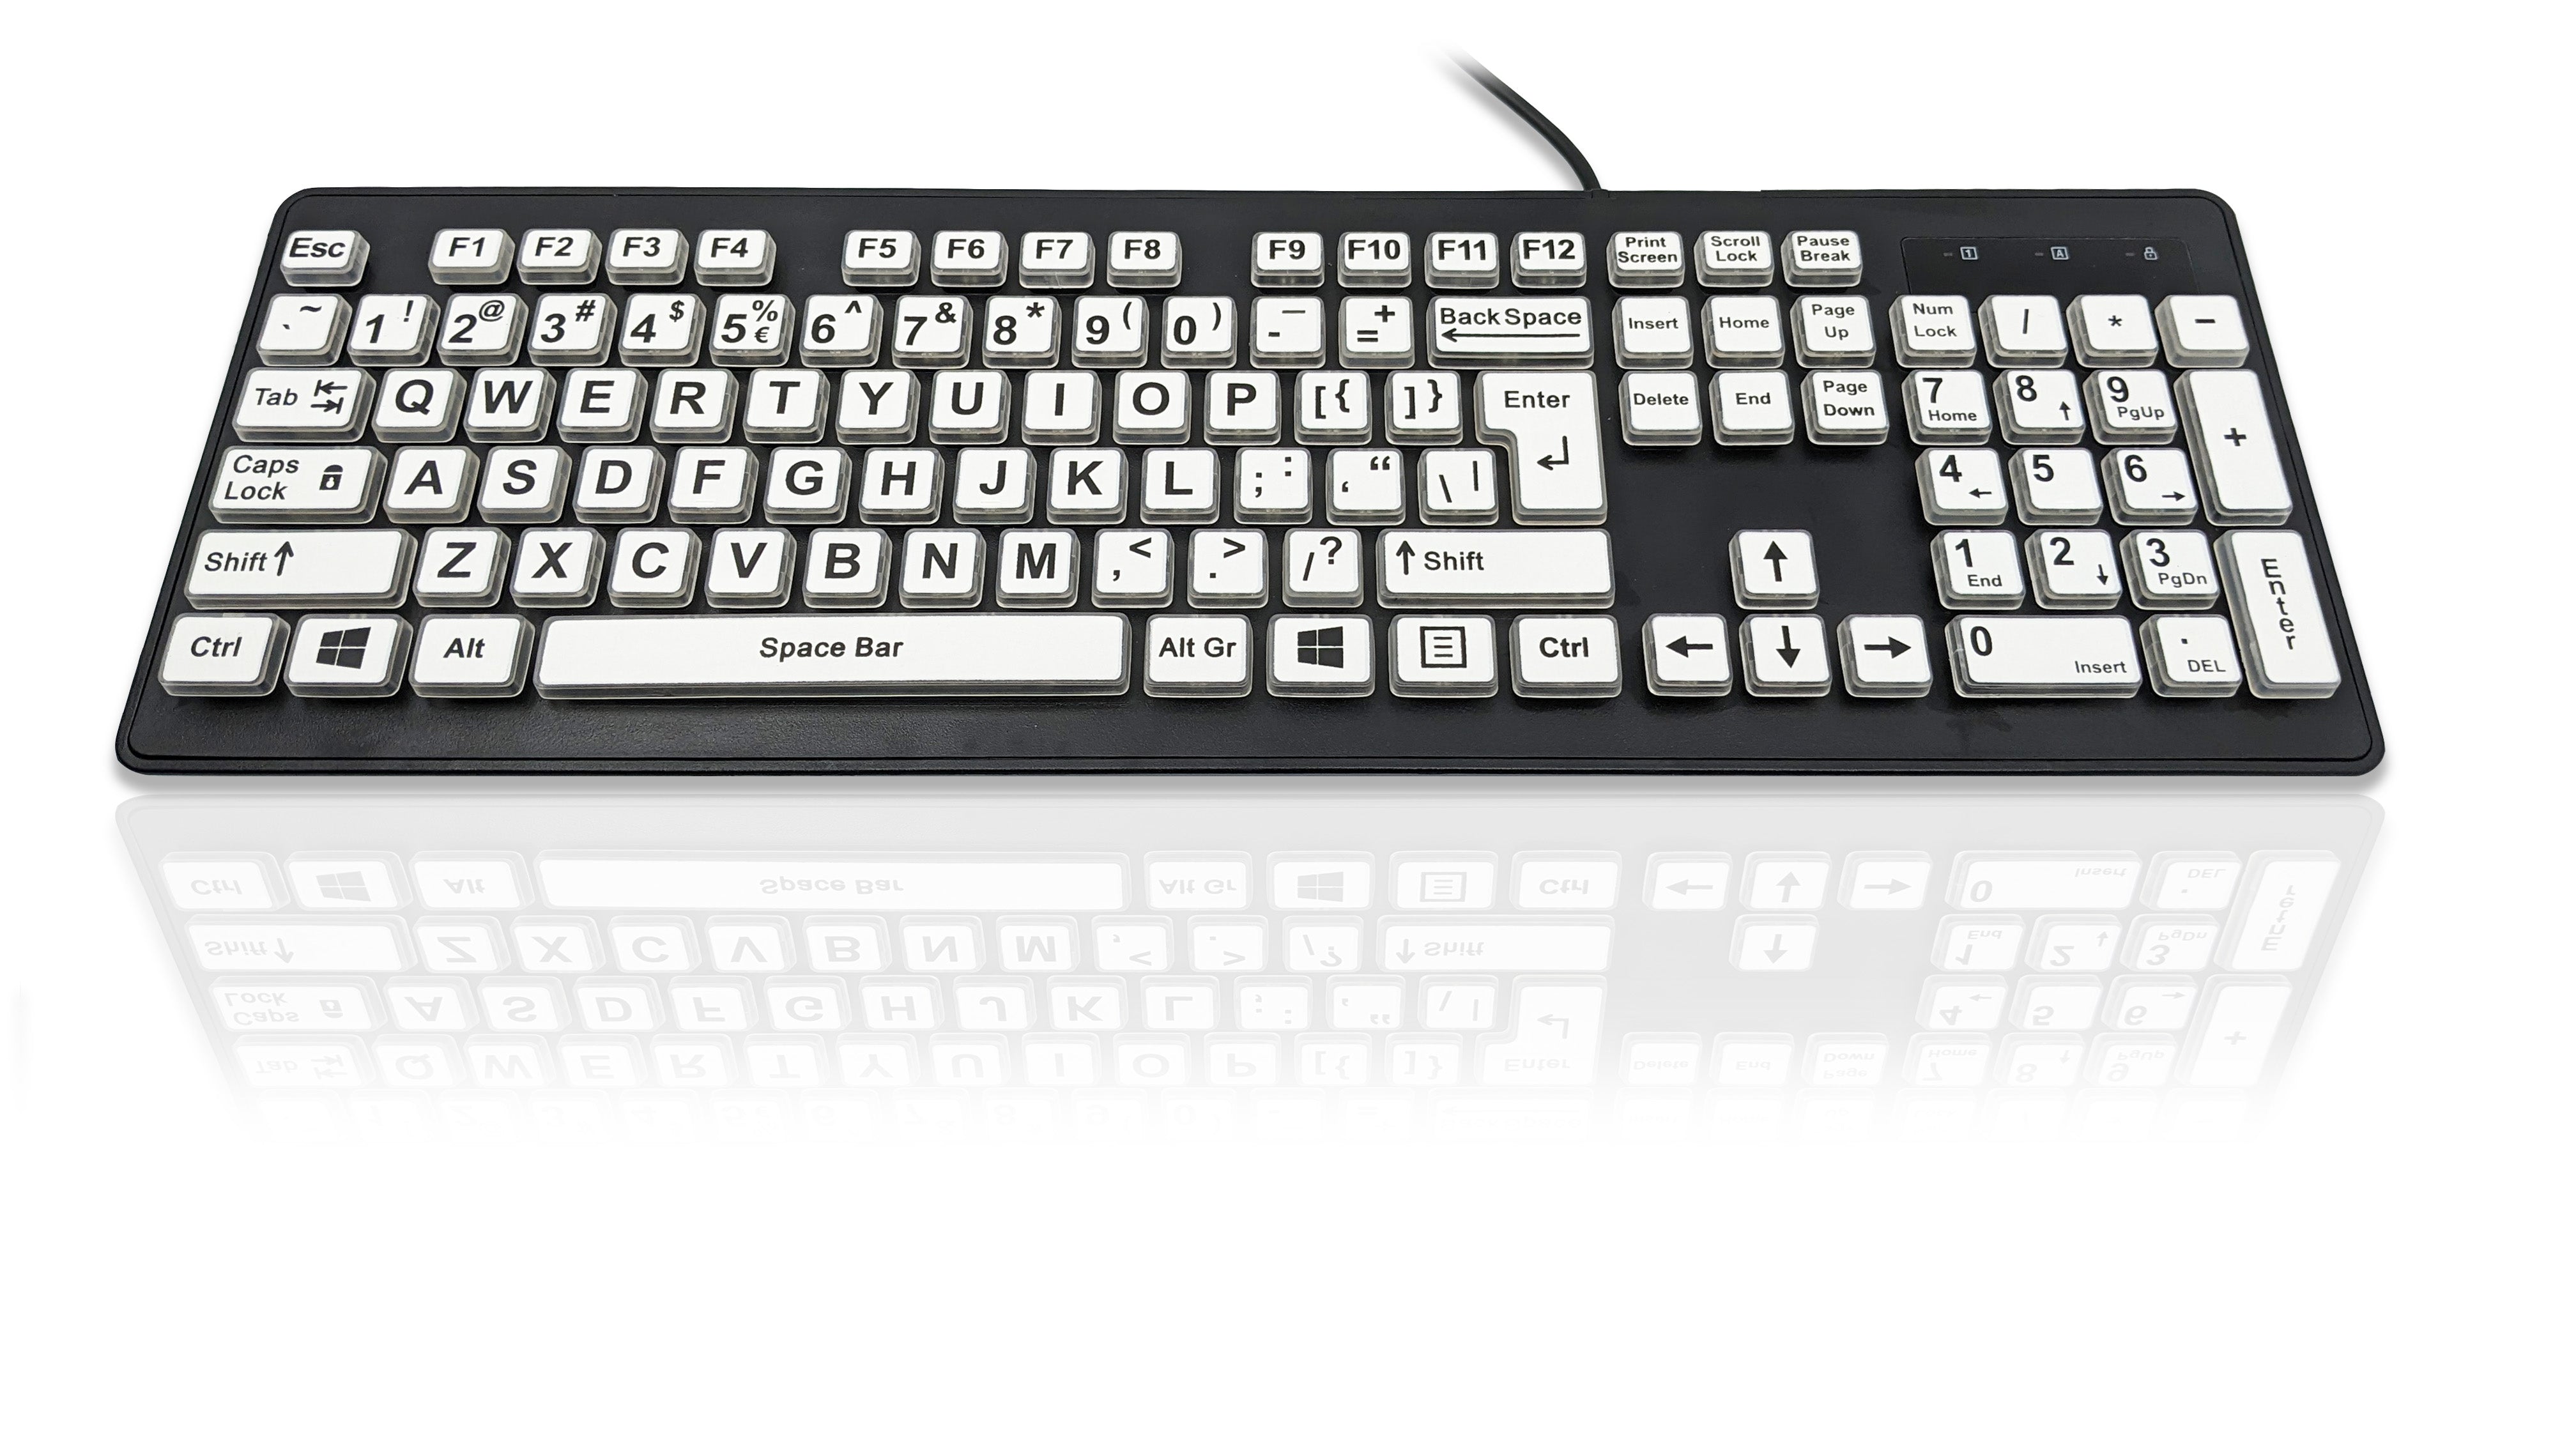 Accuratus Rainbow 2 High Contrast - USB High Contrast Visual Impairment Keyboard with Extra Large Black Font & White Keys